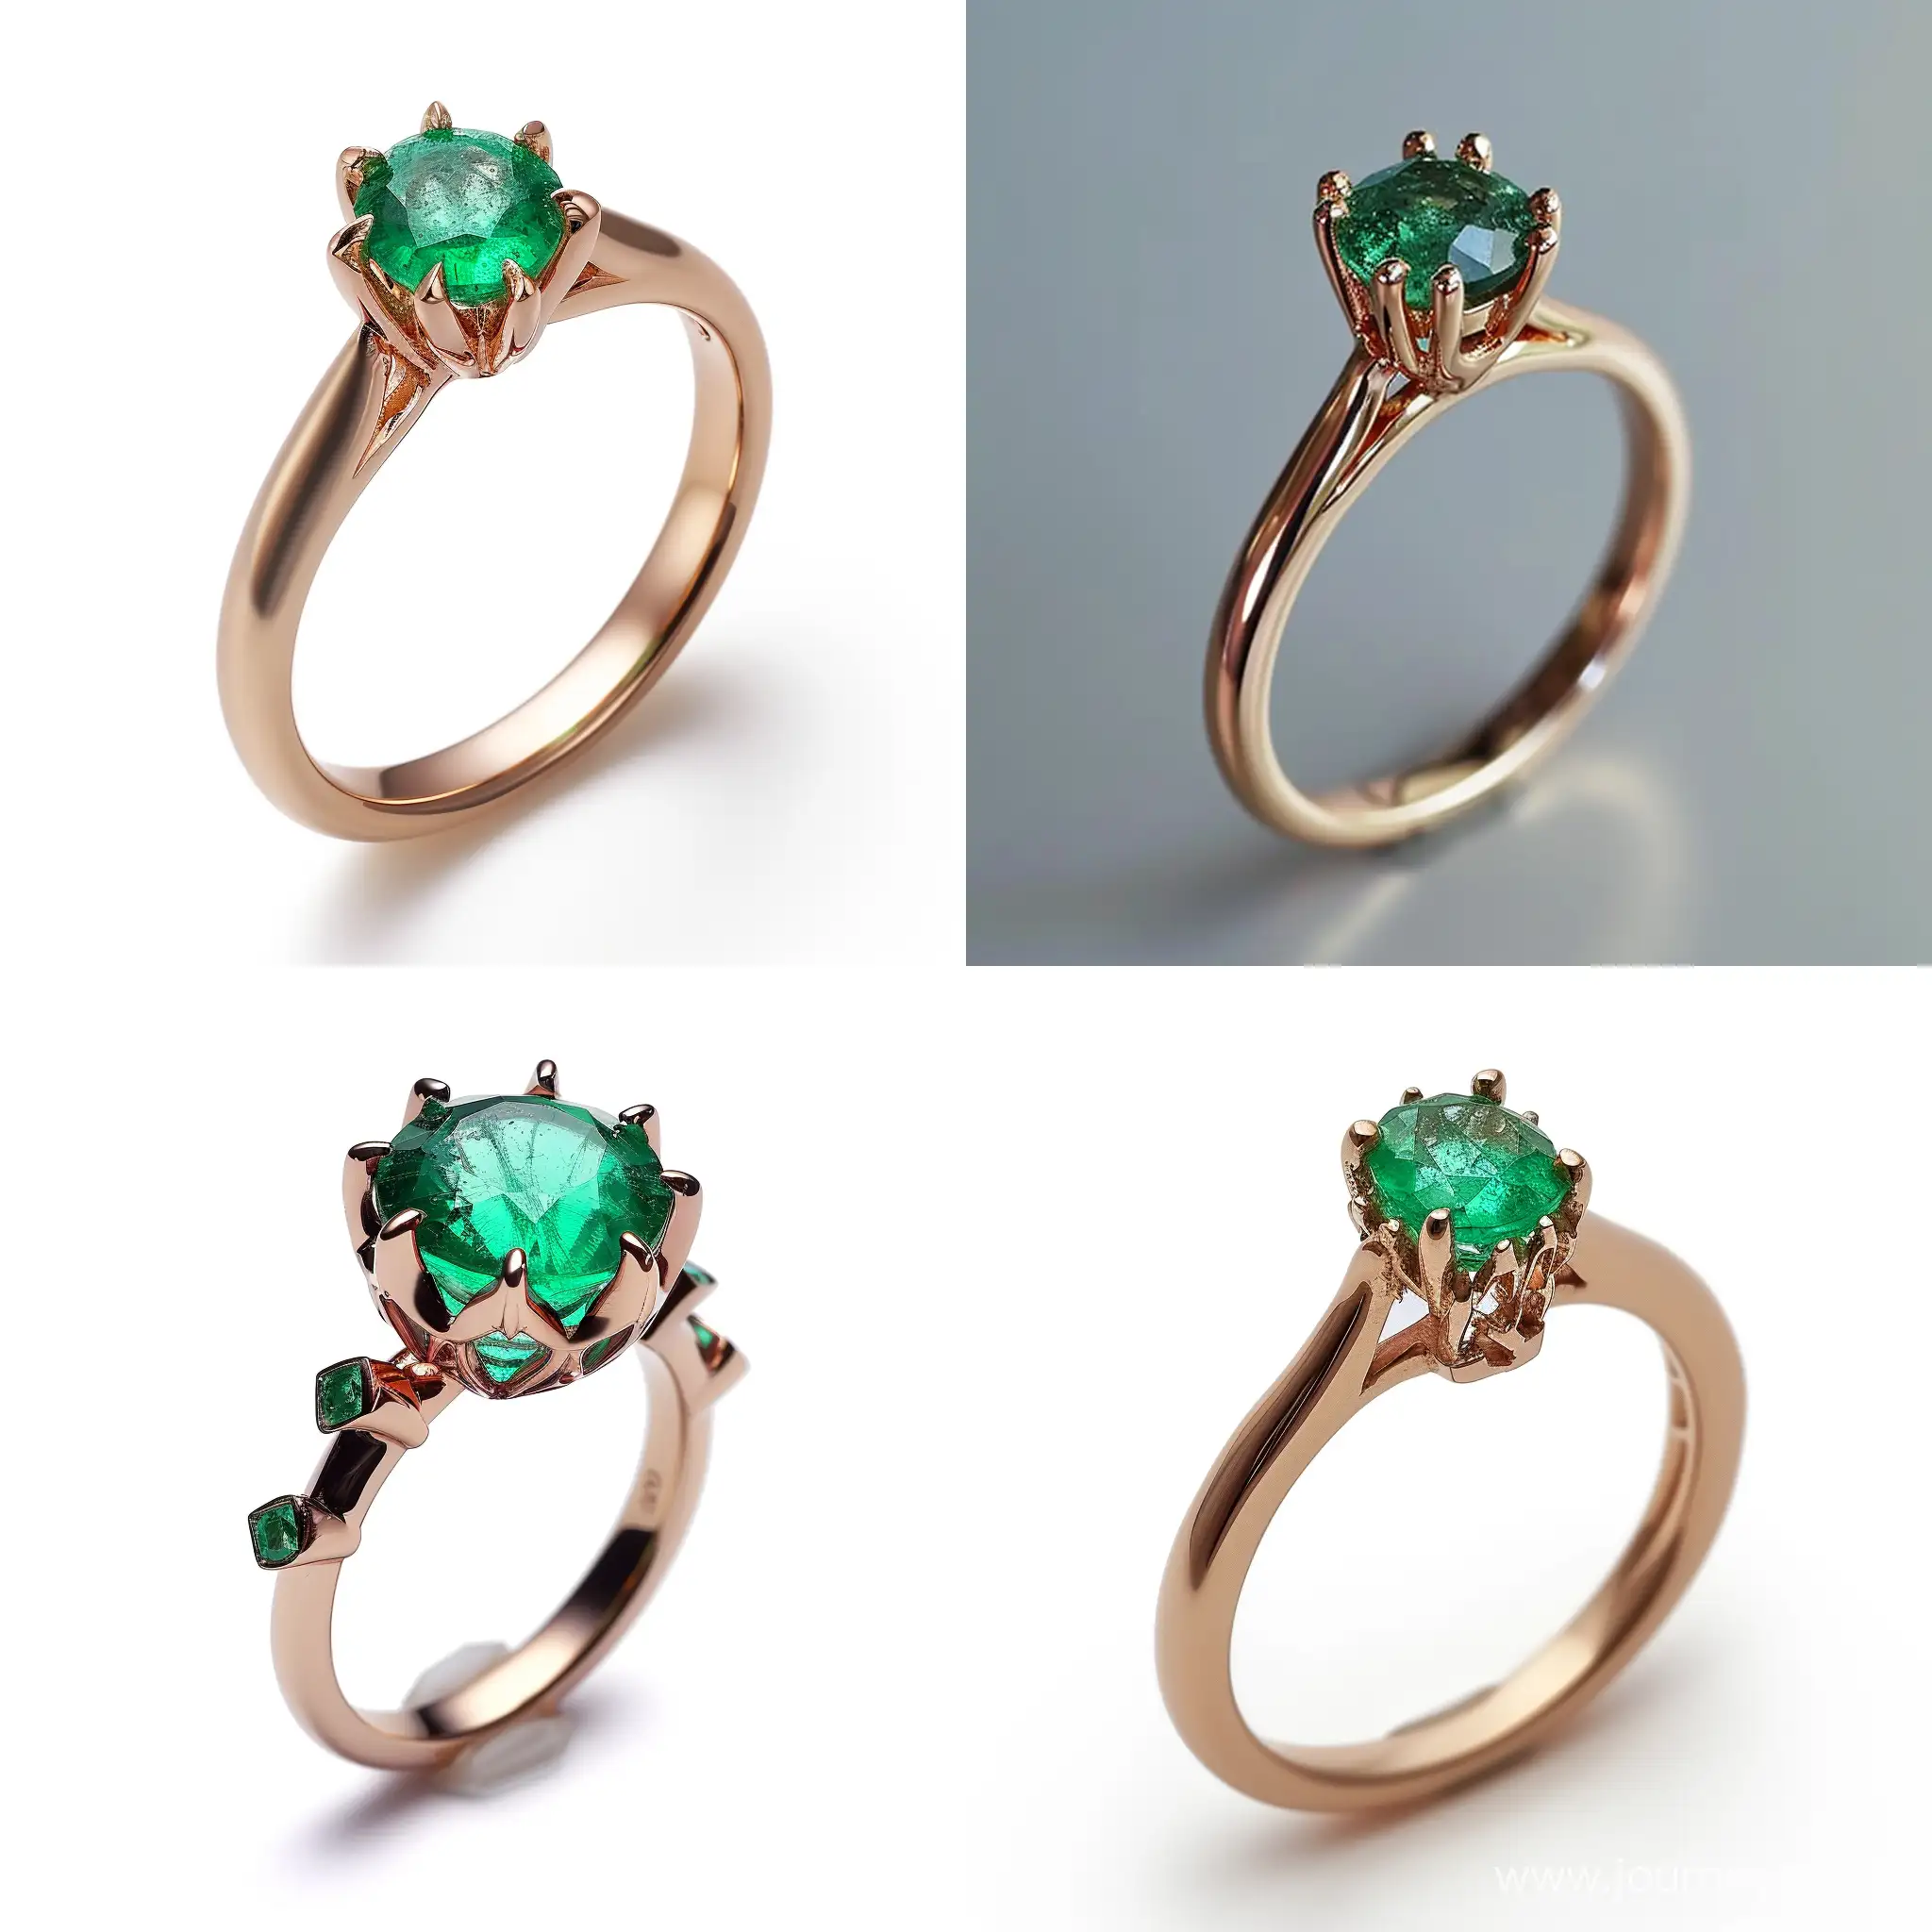 Exquisite-4Carat-Emerald-Ring-in-Stunning-Red-Gold-Side-View